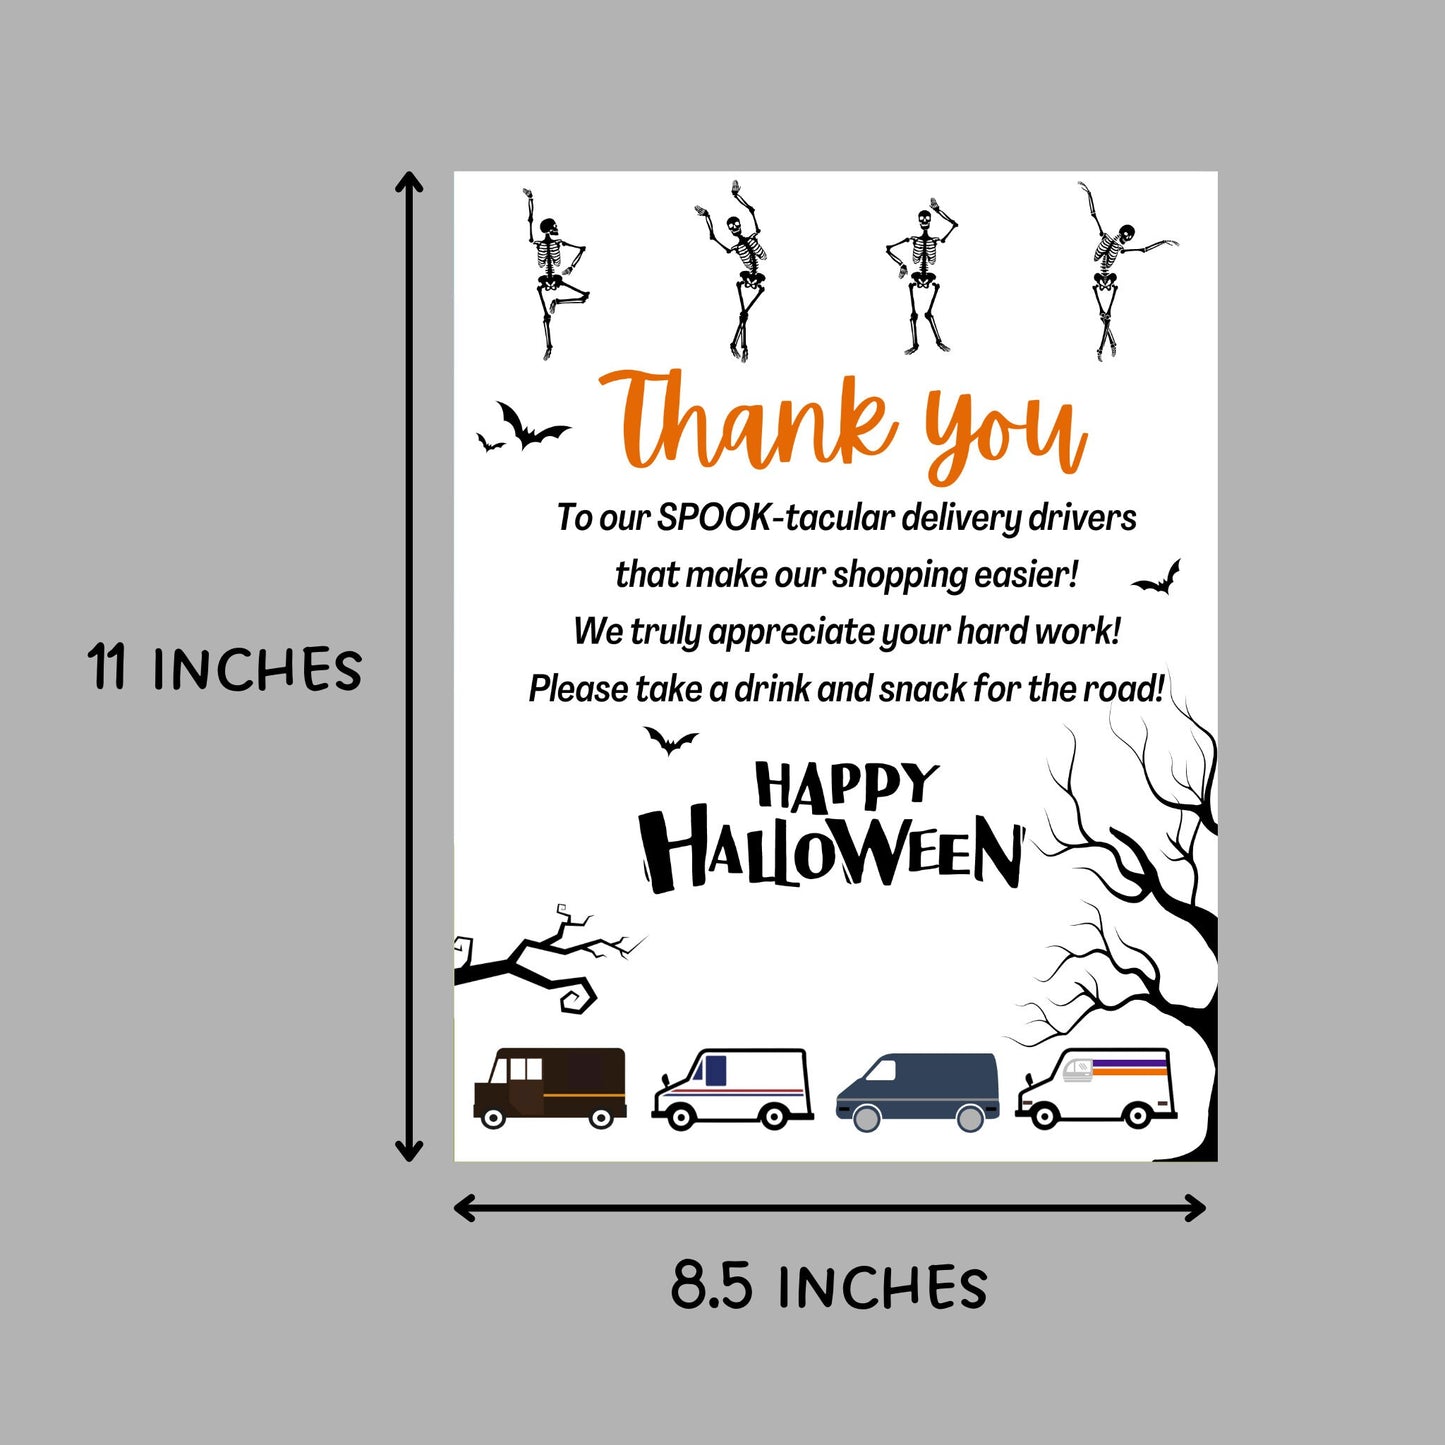 Thank You Snack & Drink Sign, Halloween Delivery Driver Appreciation Sign, Mail Carrier Treat Basket Printable Sign, Essential Worker Sign